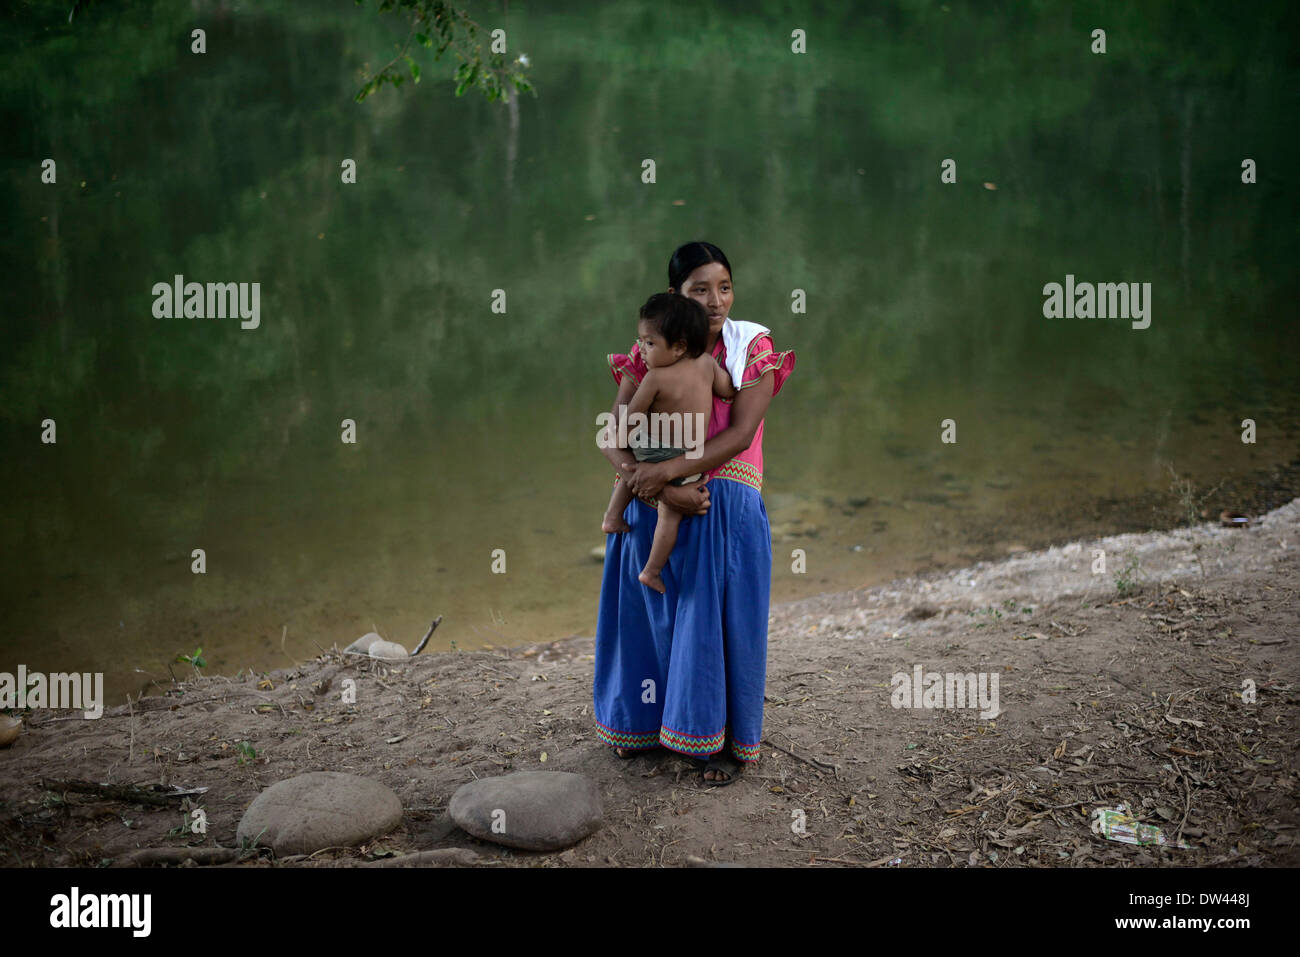 (140227) -- NGABE BUGLE REGION, Feb. 27, 2014 (Xinhua) -- A woman of the Ngabe Bugle ethnic group carries her baby in a camp near the Tabasara river bank in the Ngabe Bugle indigenous region, 450 km west of Panama City, capital of Panama, on Feb. 24, 2014. The Ngabe Bugle indigenous region is located in the western region of Panama, and covers an area of 6,968 square km, with 91 per cent of its population living in extreme poverty. Native leaders of the Ngabe Bugle region declared a 'national alert', because of the eviction notice issued by a company which is developing the hydro-electric proj Stock Photo